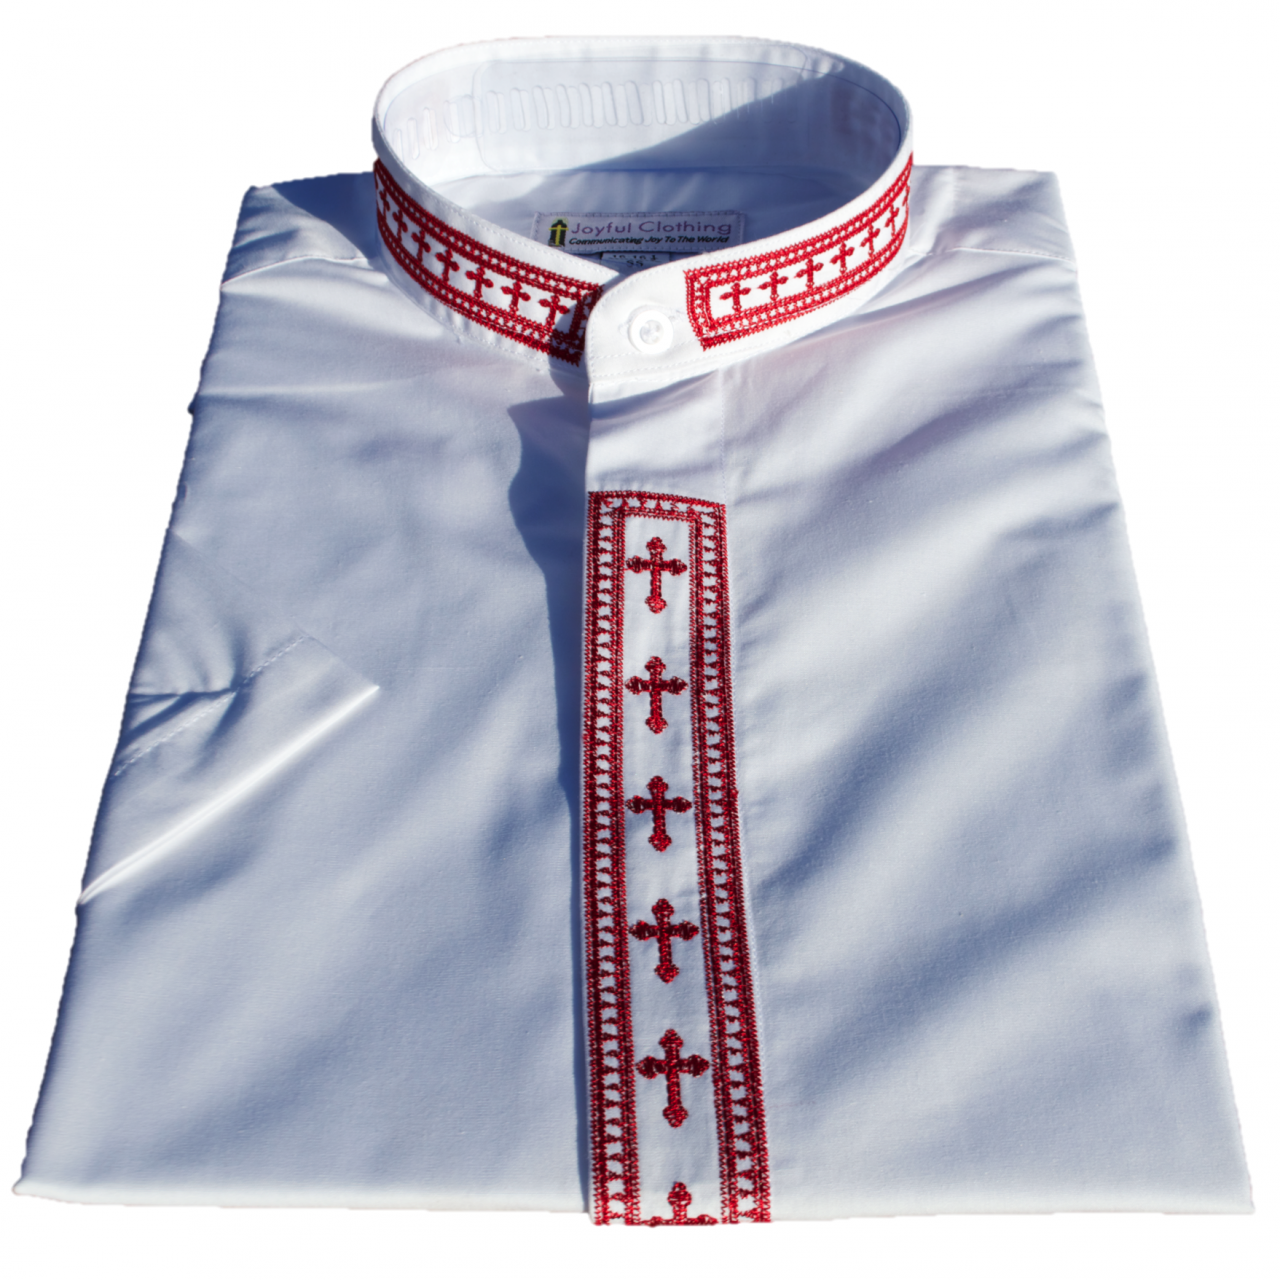 361. Men's Short-Sleeve Clergy Shirt With Fine Embroidery - White/Red